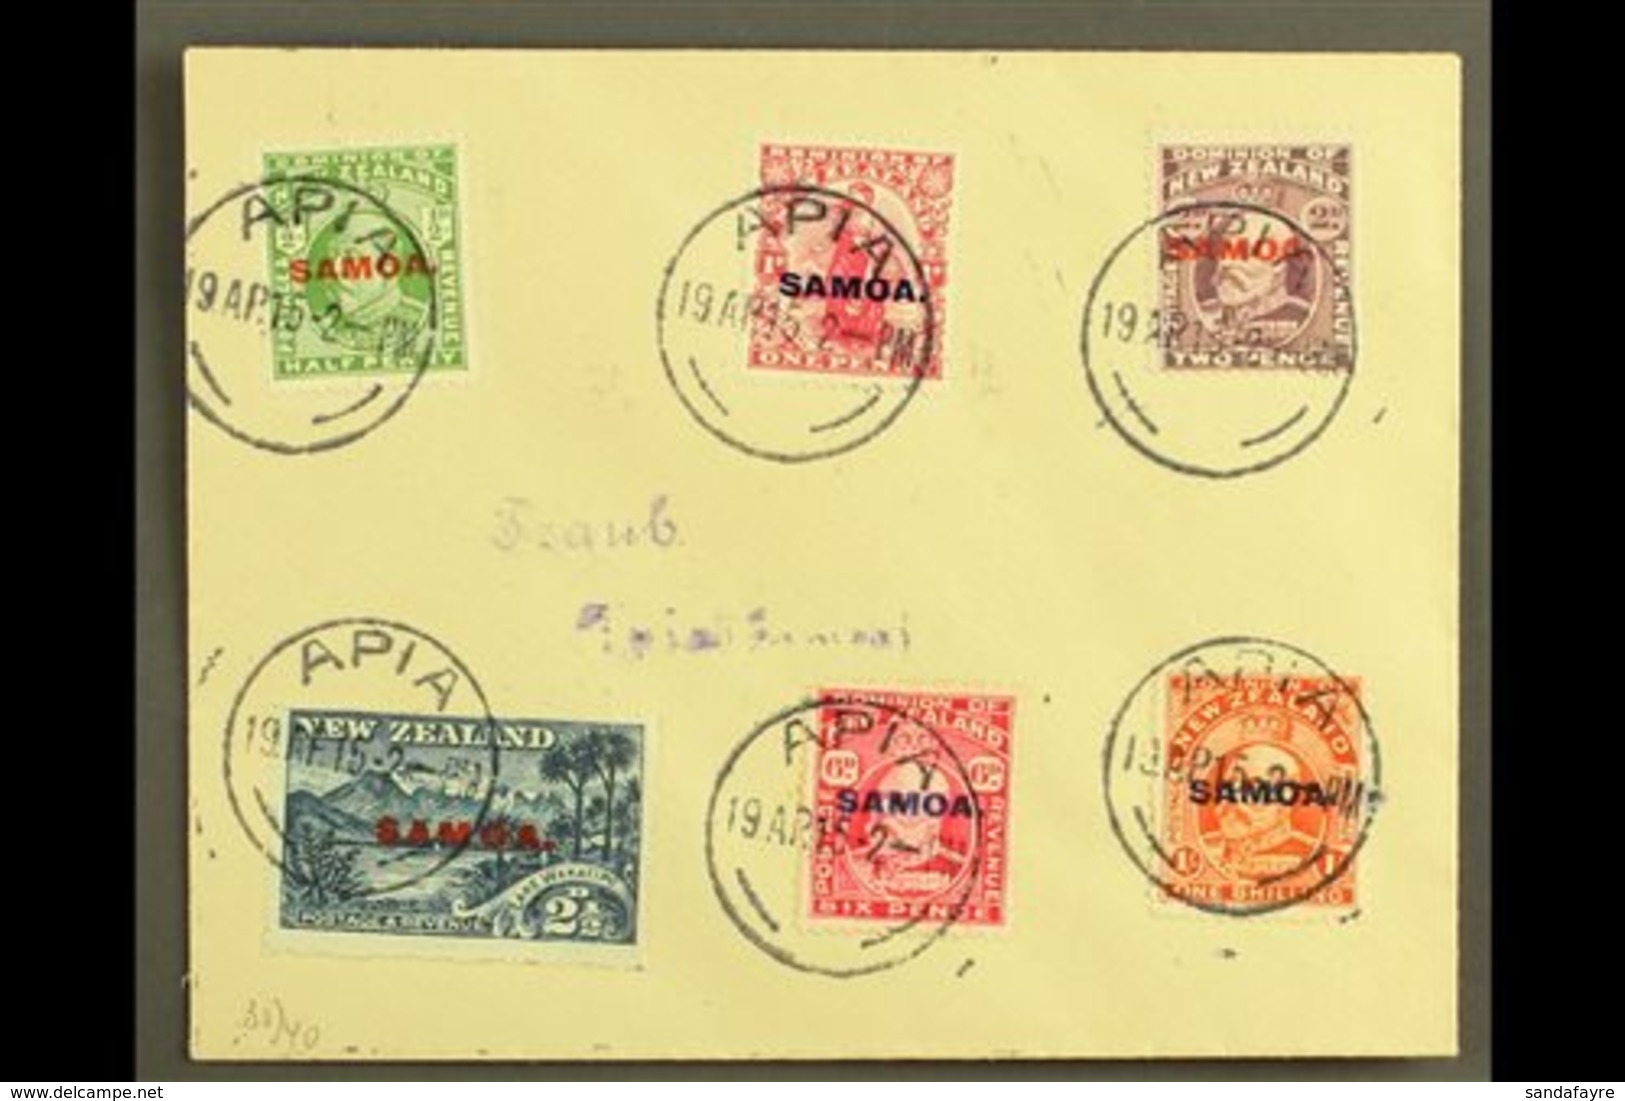 1915 KEVII New Zealand Overprints, Complete Set On Small Plain Cover, SG 115/21, Each With Strike Of "APIA" 19.4.15 Pmk. - Samoa